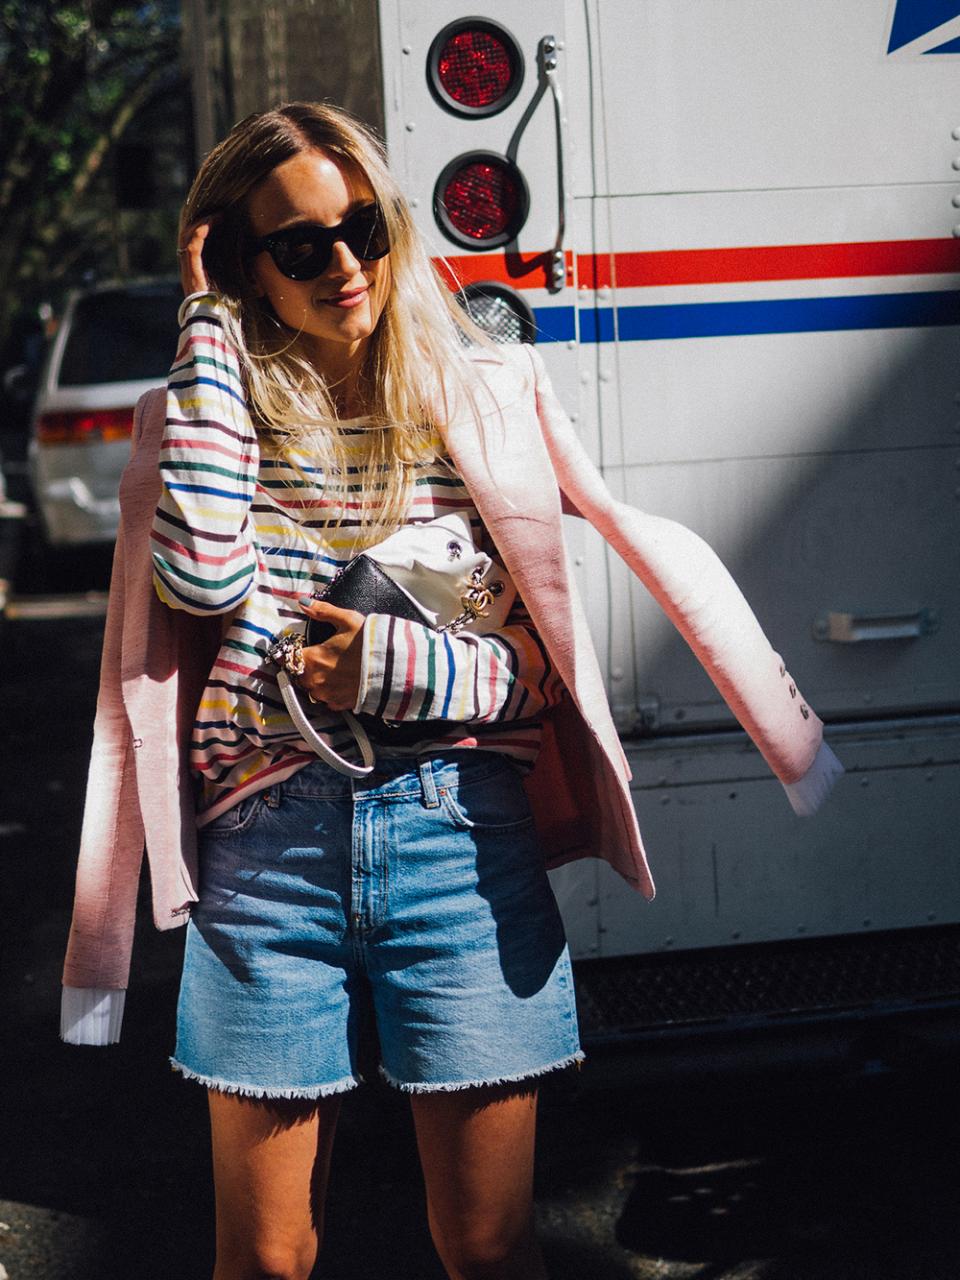 Charlotte Groeneveld Thefashionguitar wearing Chanel Cuba Cruis and the Gabrielle Chanel bag